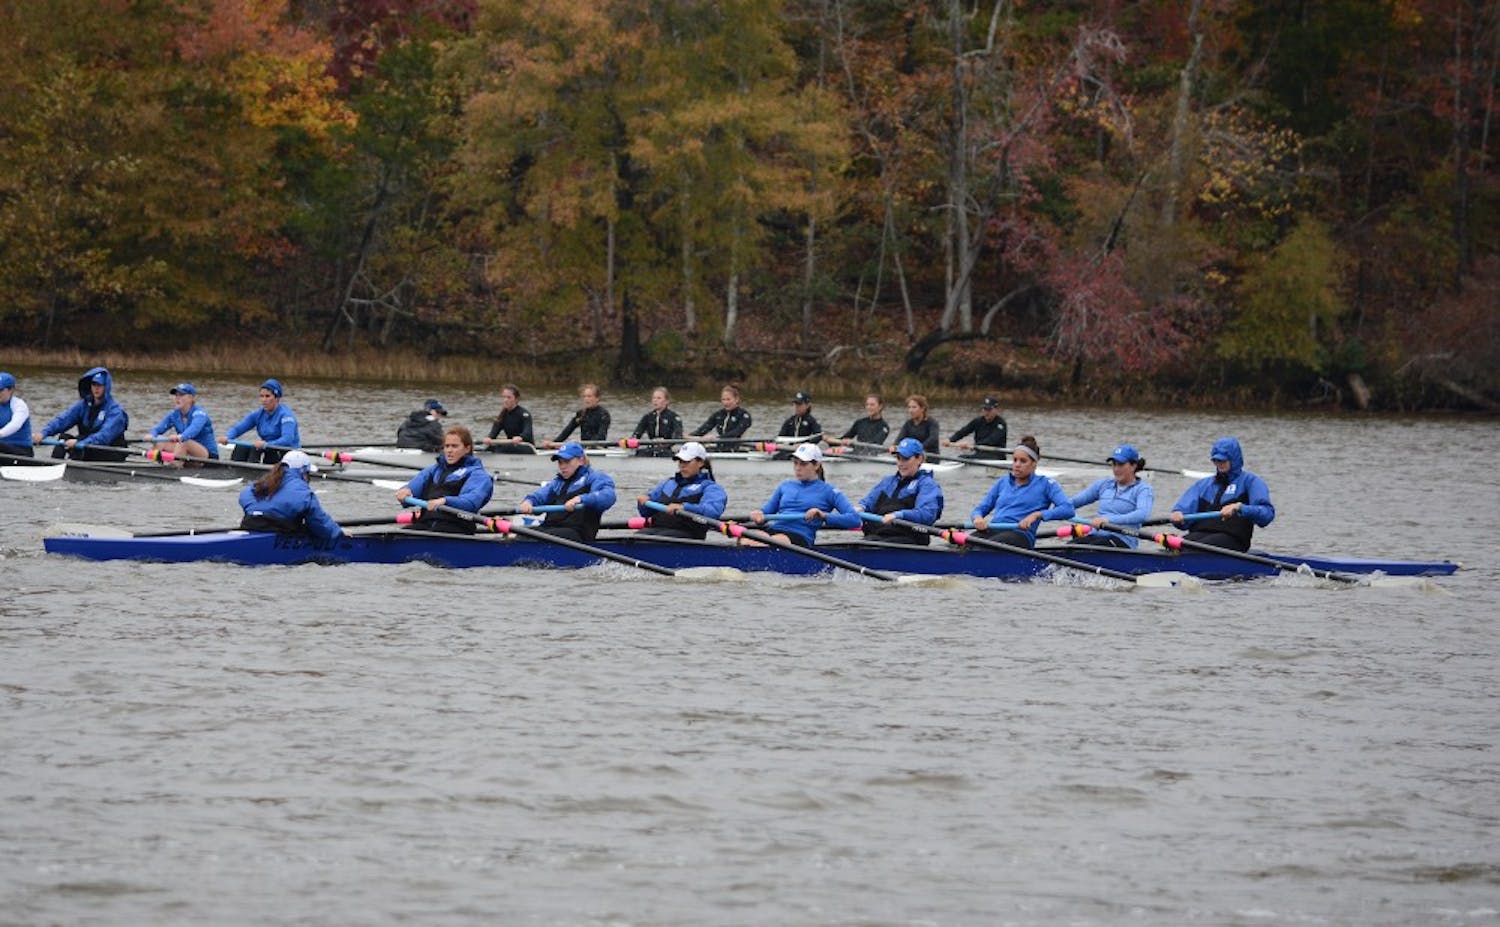 The Blue Devils will take aim at two more ranked opponents in No. 14 Indiana and No. 17 Notre Dame this weekend at the Dale England Cup.